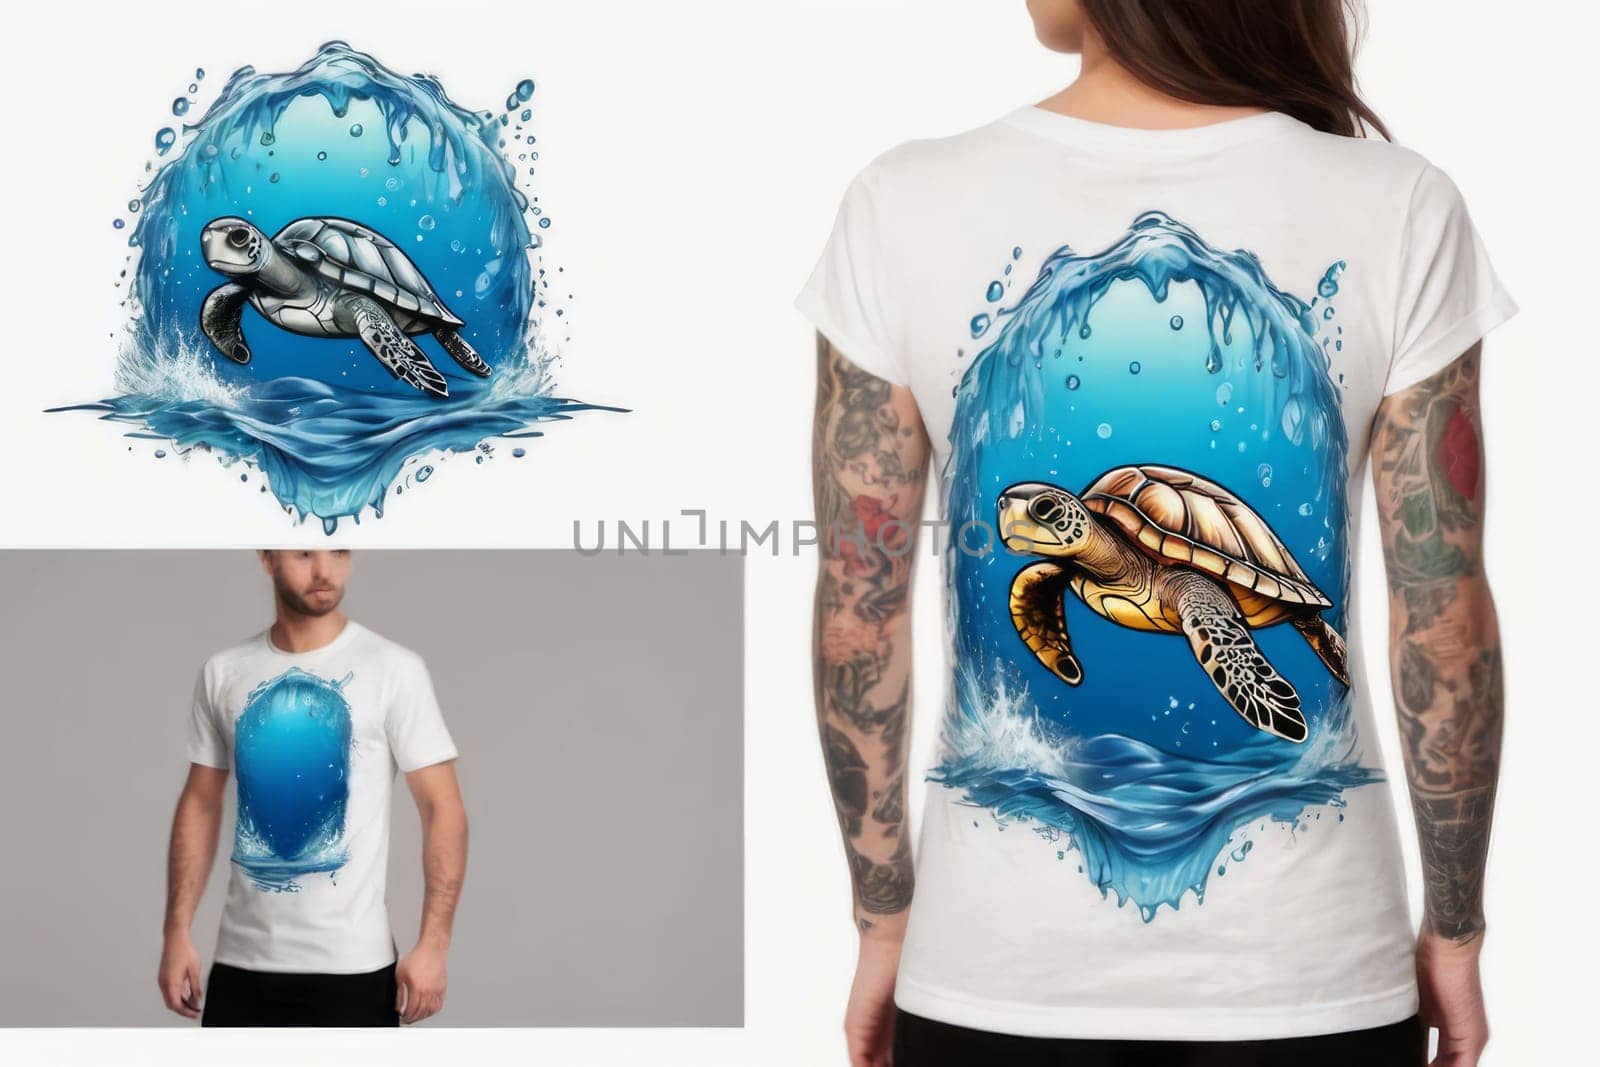 Turtle printed on vivid blue t-shirt, capturing essence of marine tranquility. For clothing design, animal themed clothing advertising, as illustration for interesting clothing style, Tshirt print. by Angelsmoon